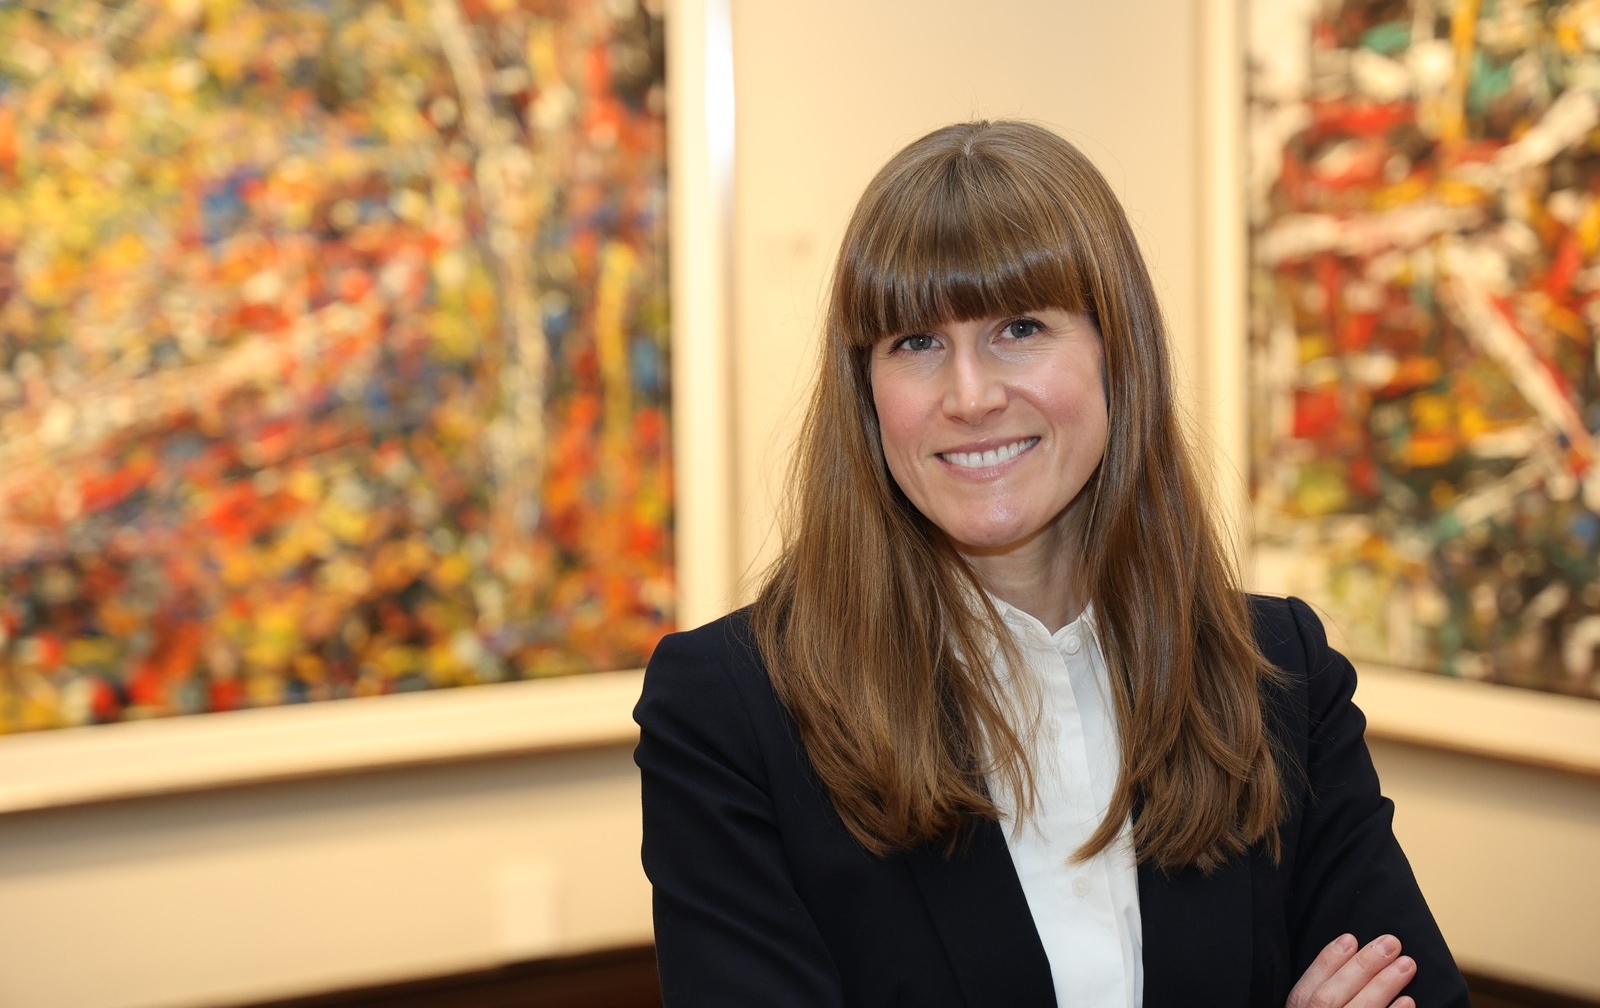 A woman with long brown hair and bangs is wearing a dark blazer over a white collared shirt. She is smiling and is standing in front or paintings by Quebec artist Jean-Paul Riopelle.